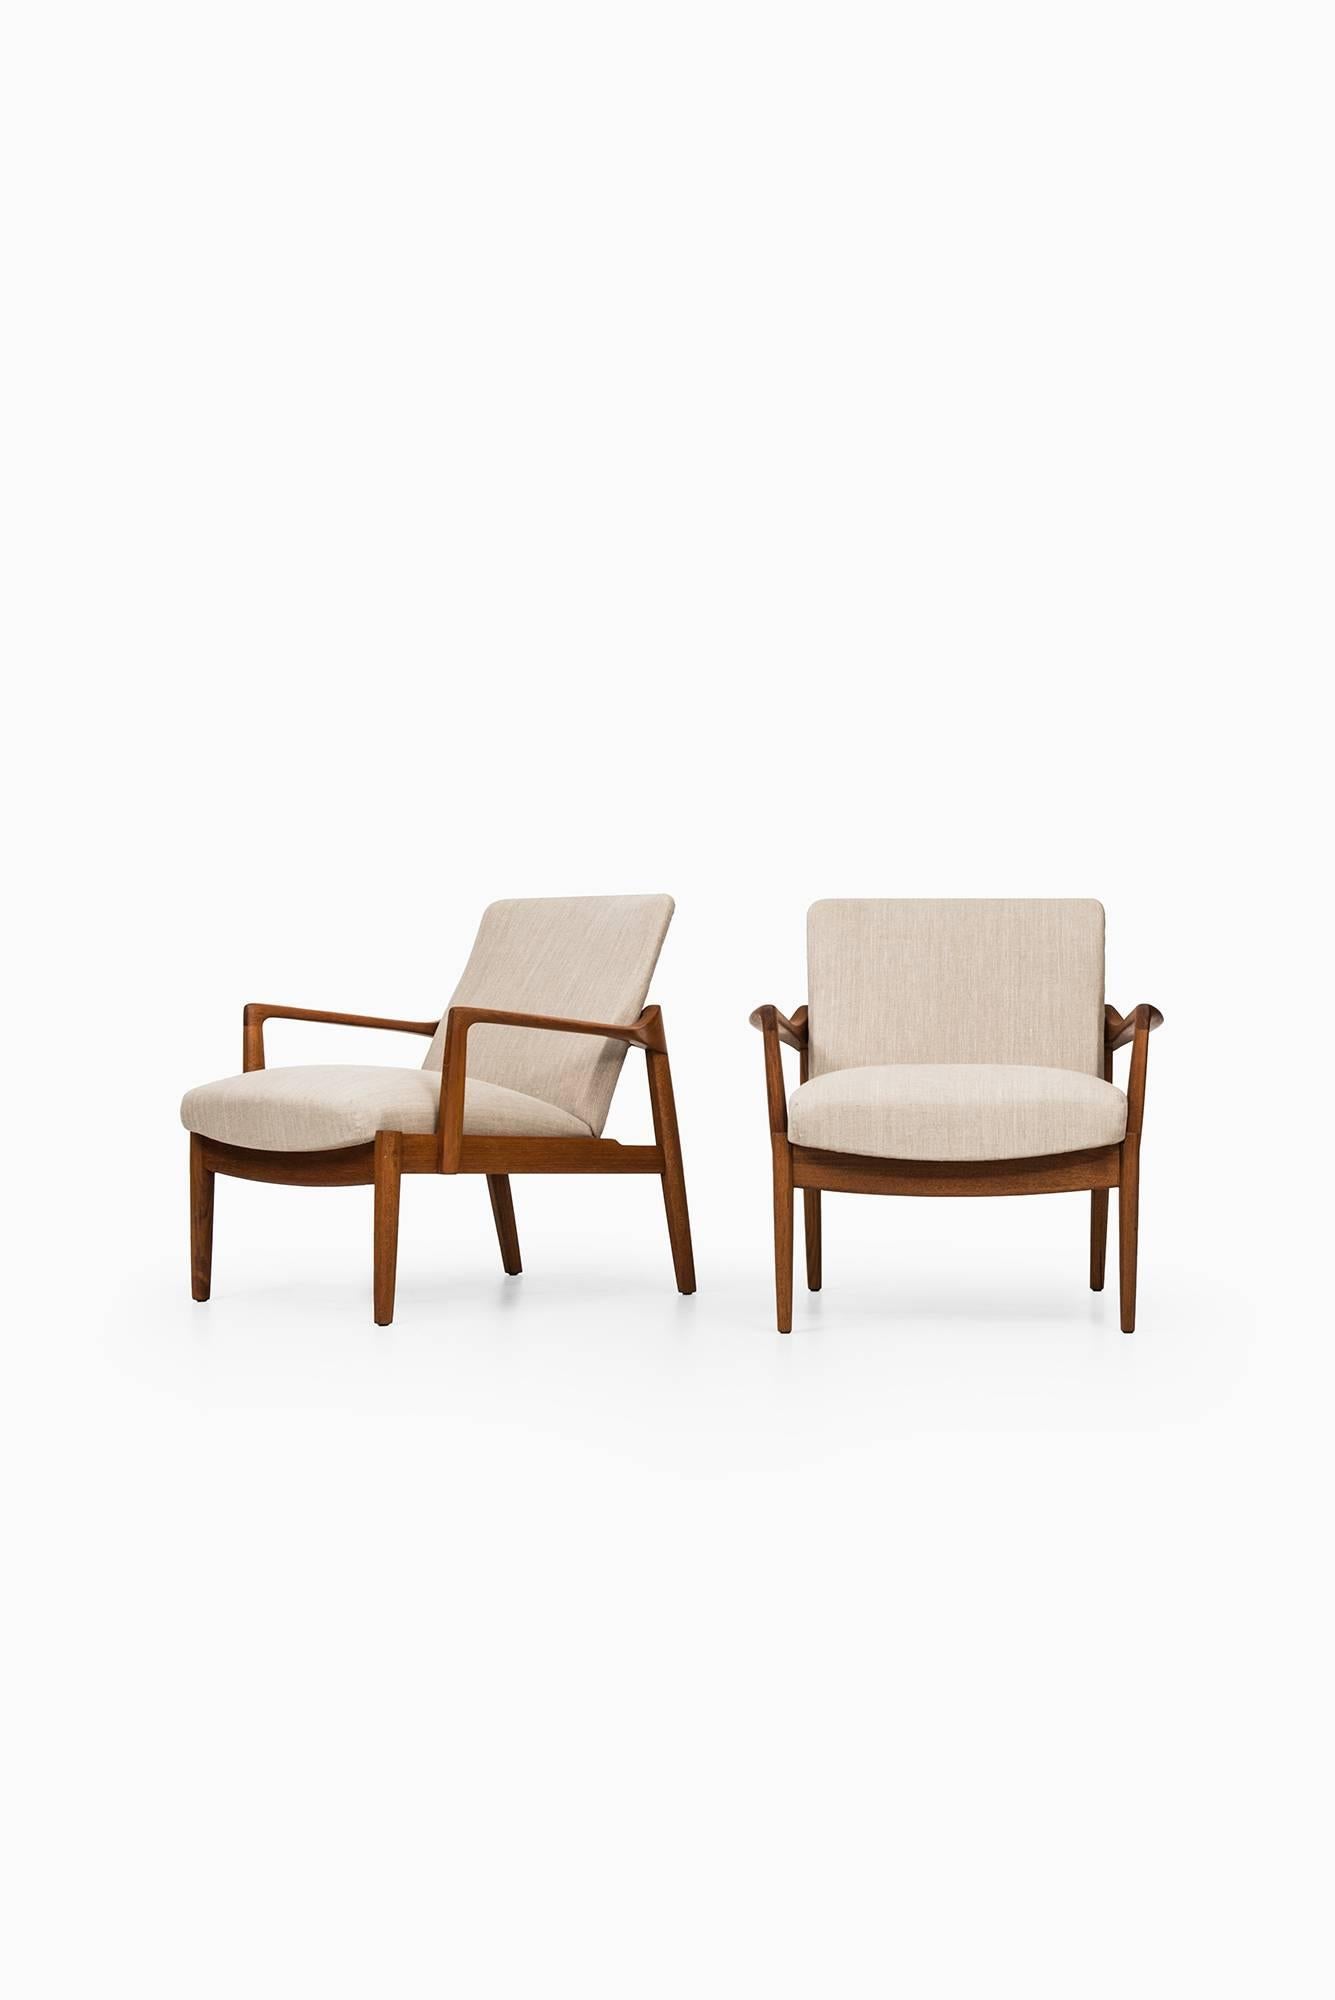 Rare pair of easy chairs model FD125 designed by Tove & Edvard Kindt-Larsen. Produced by France & Son in Denmark.